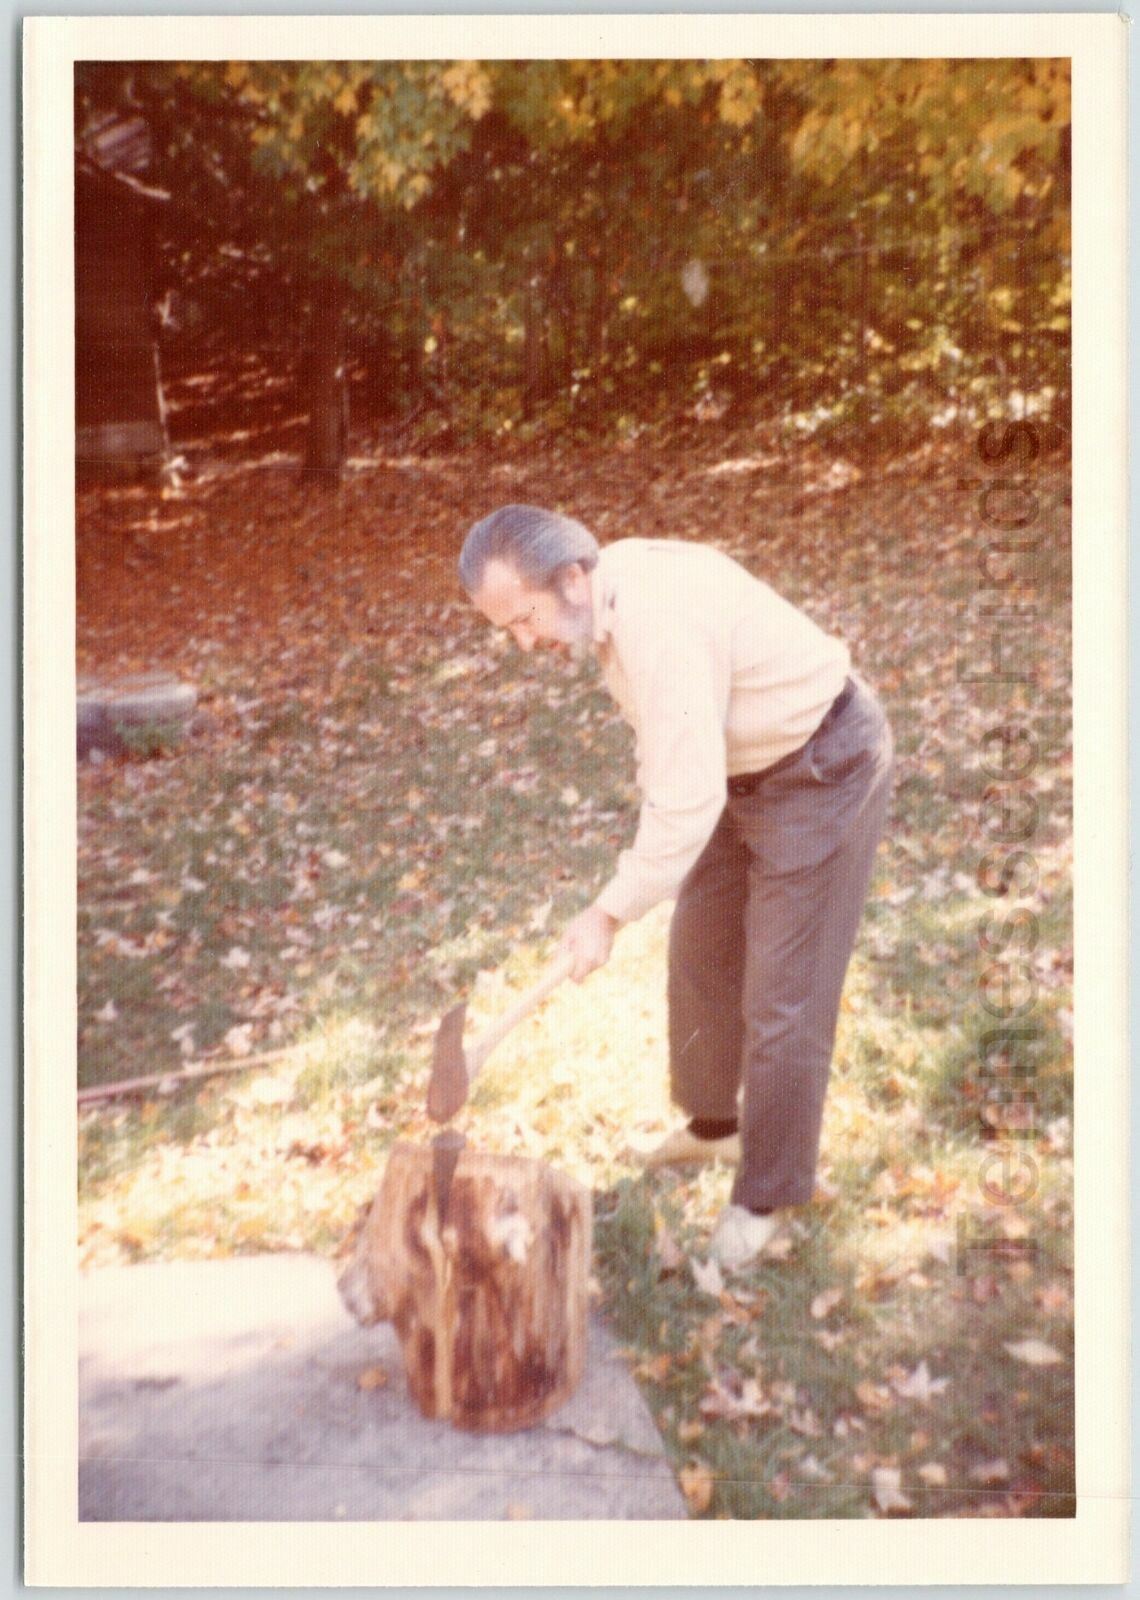 Older Man Chopping Splitting Wood w/ Axe Fall Time Photo Picture Leaves Vintsge